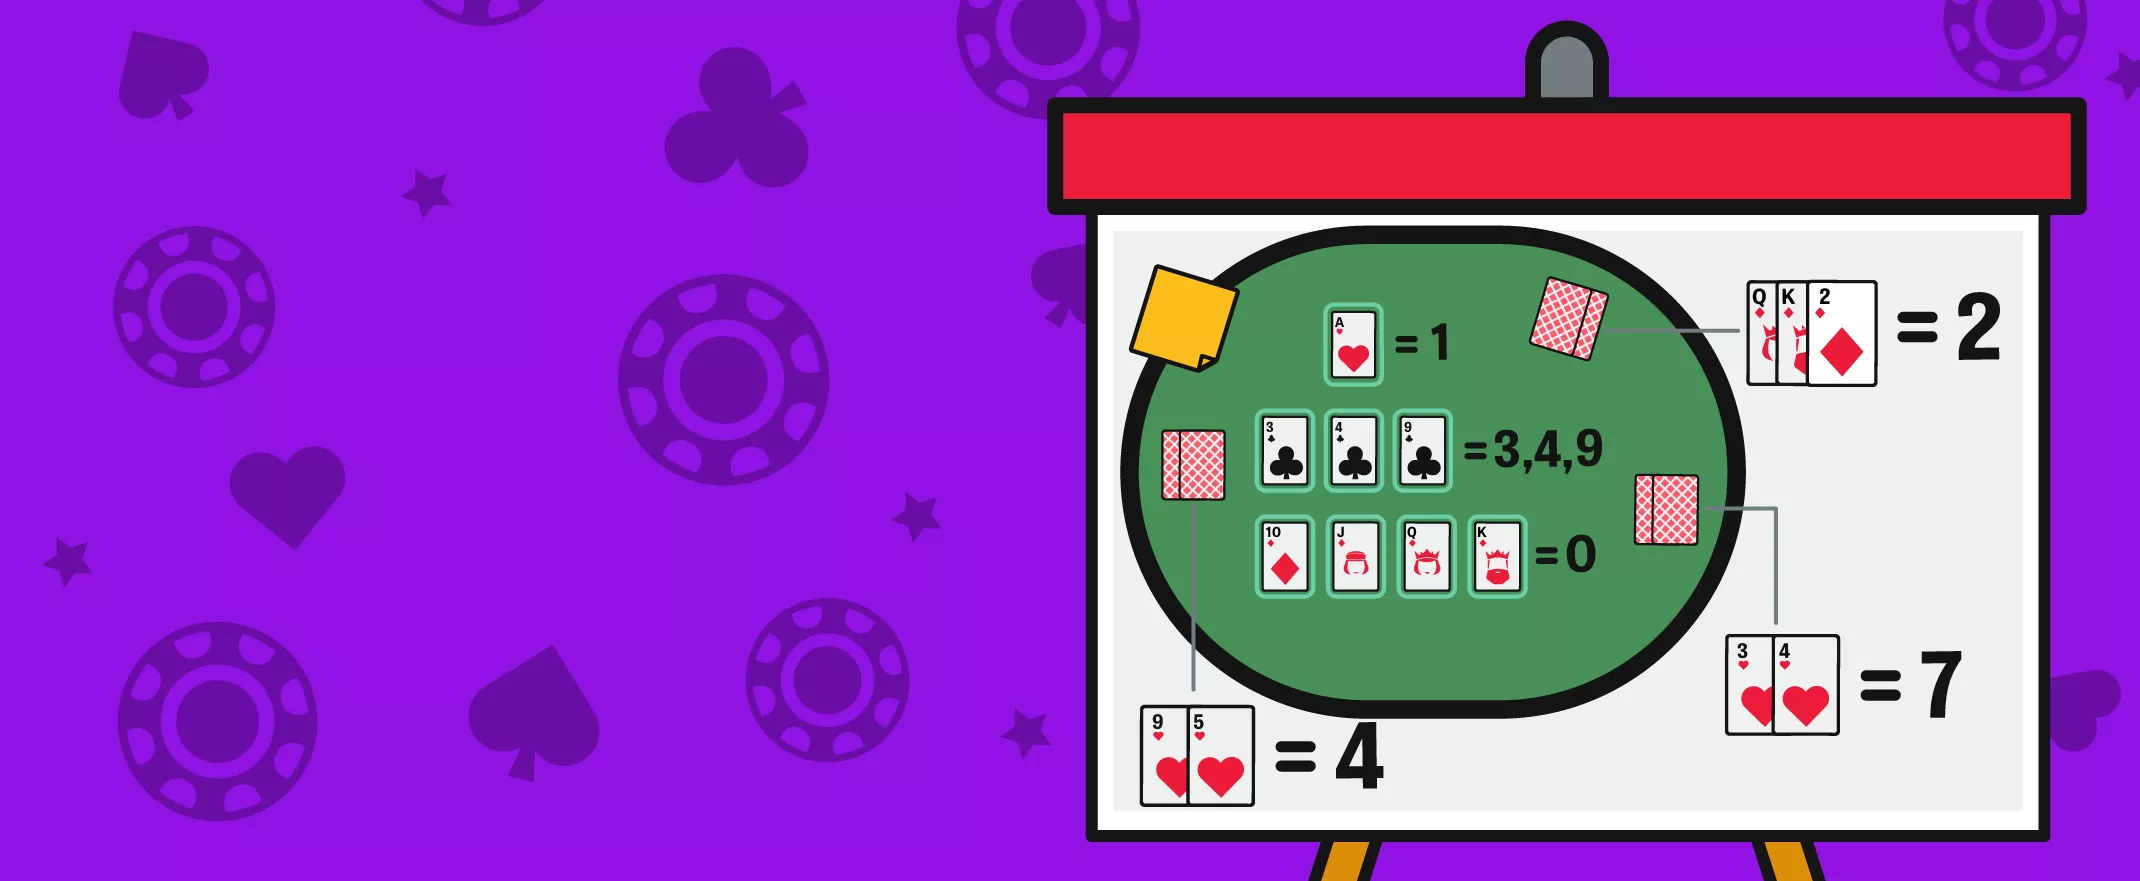 How to win at baccarat - When do you need one more card?